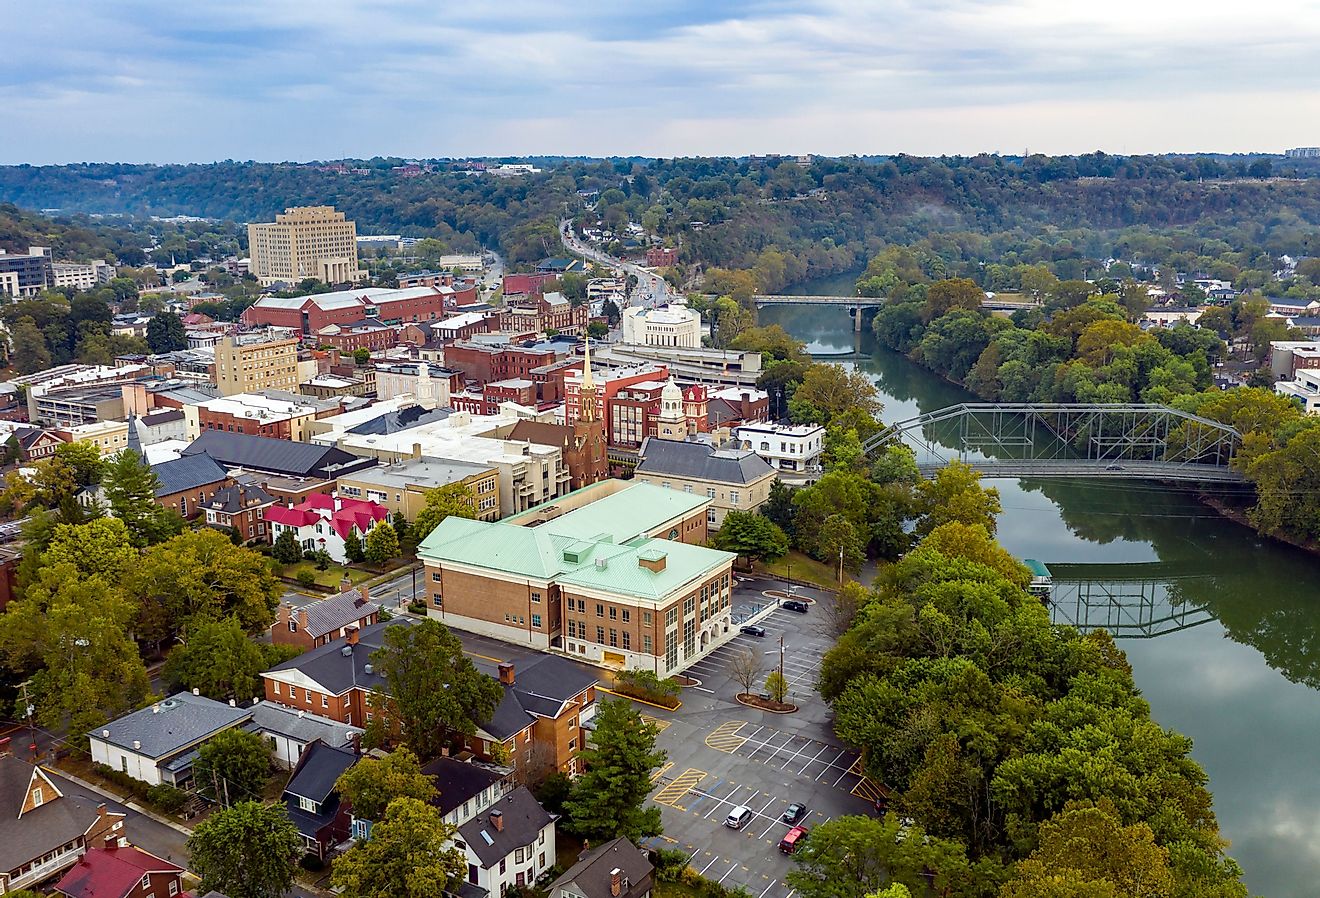 The Kentucky River meanders along framing the downtown urban core of Frankfort, Kentucky. Image credit Real Window Creative via Shutterstock.